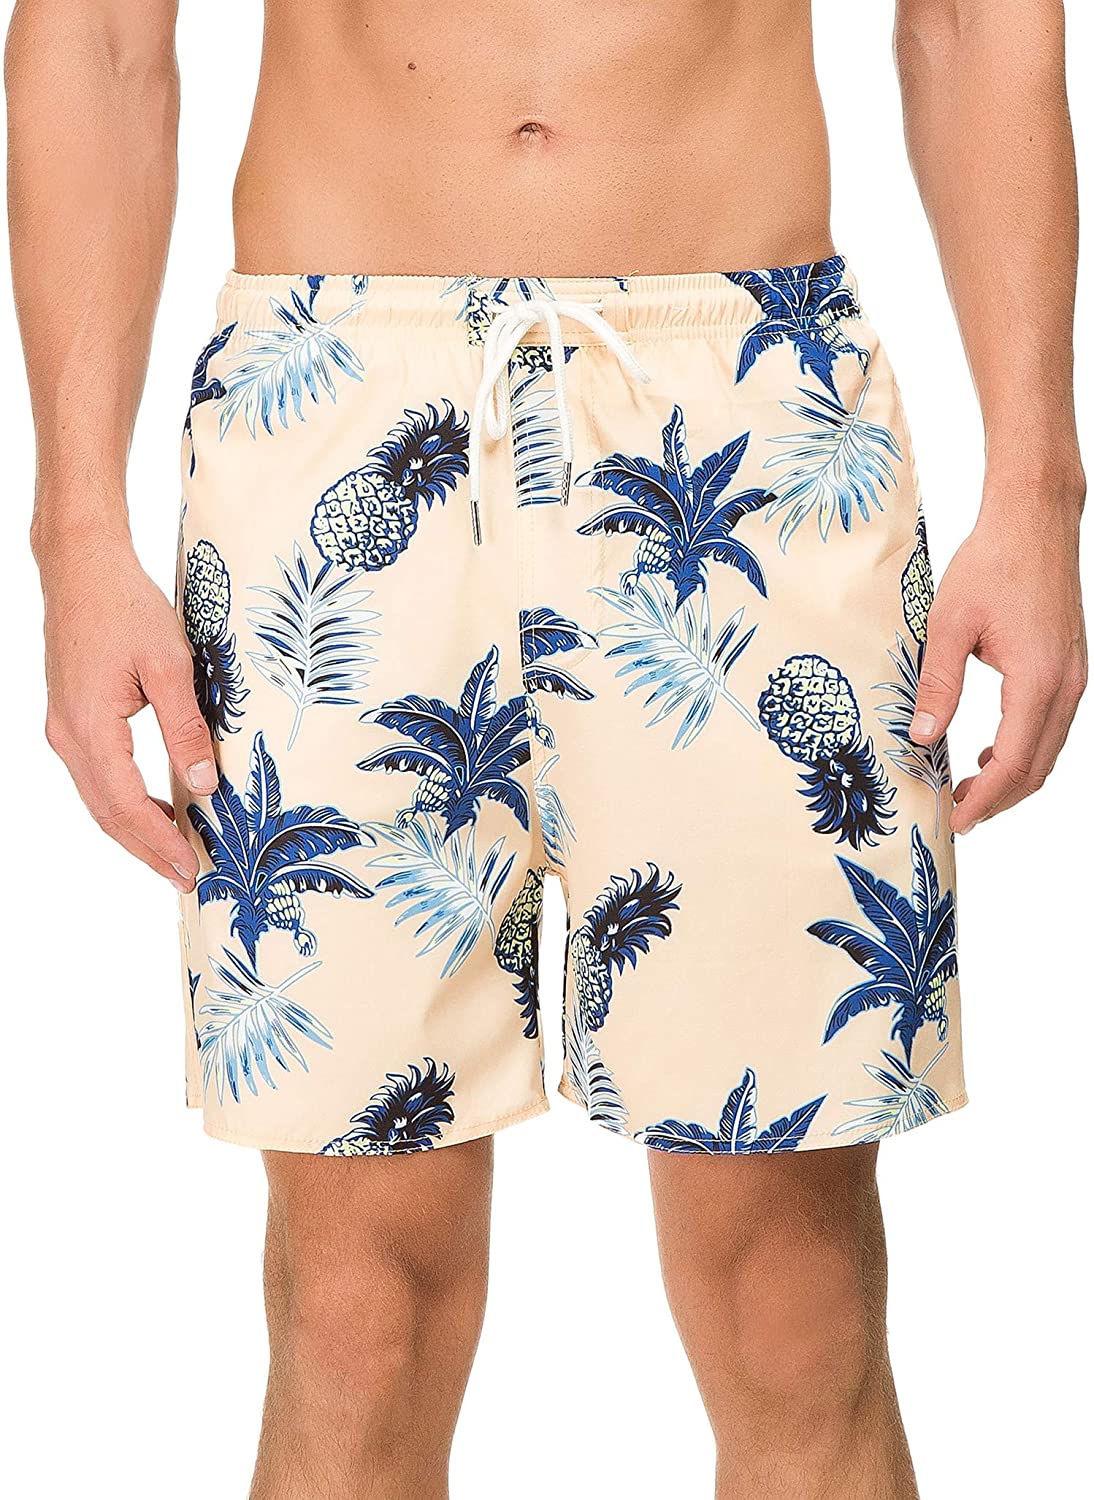 Janmid Men's Swim Trunks Quick Dry Beach Shorts with Pockets 